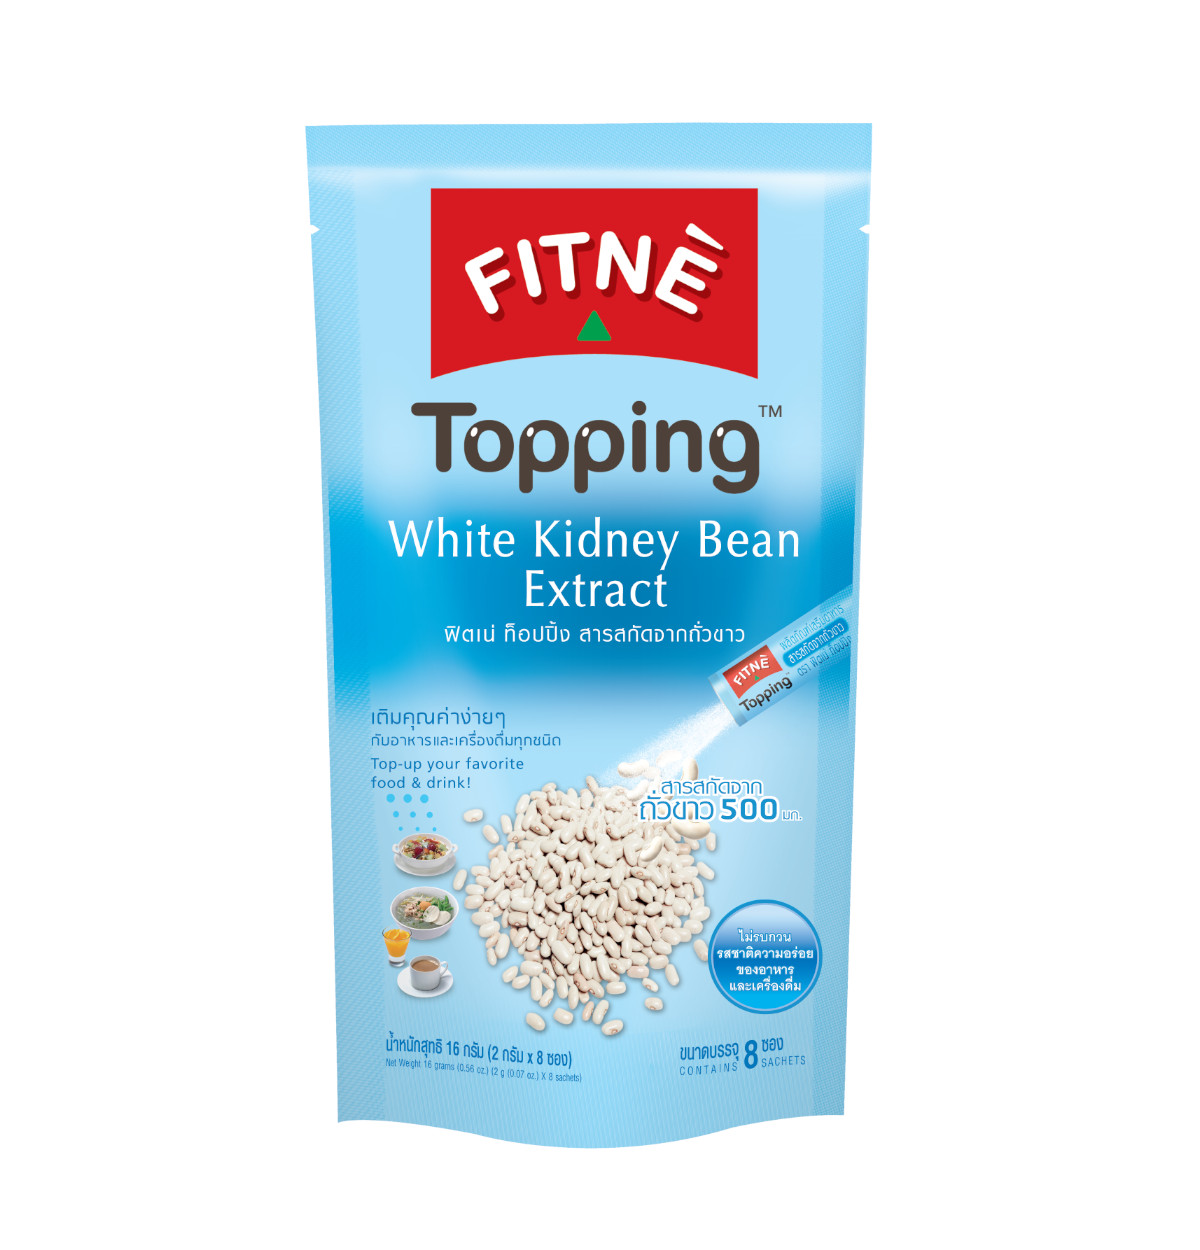 FITNE' Topping White Kidney Bean Extract Dietary Supplement Product 2 g.x8 Sticks